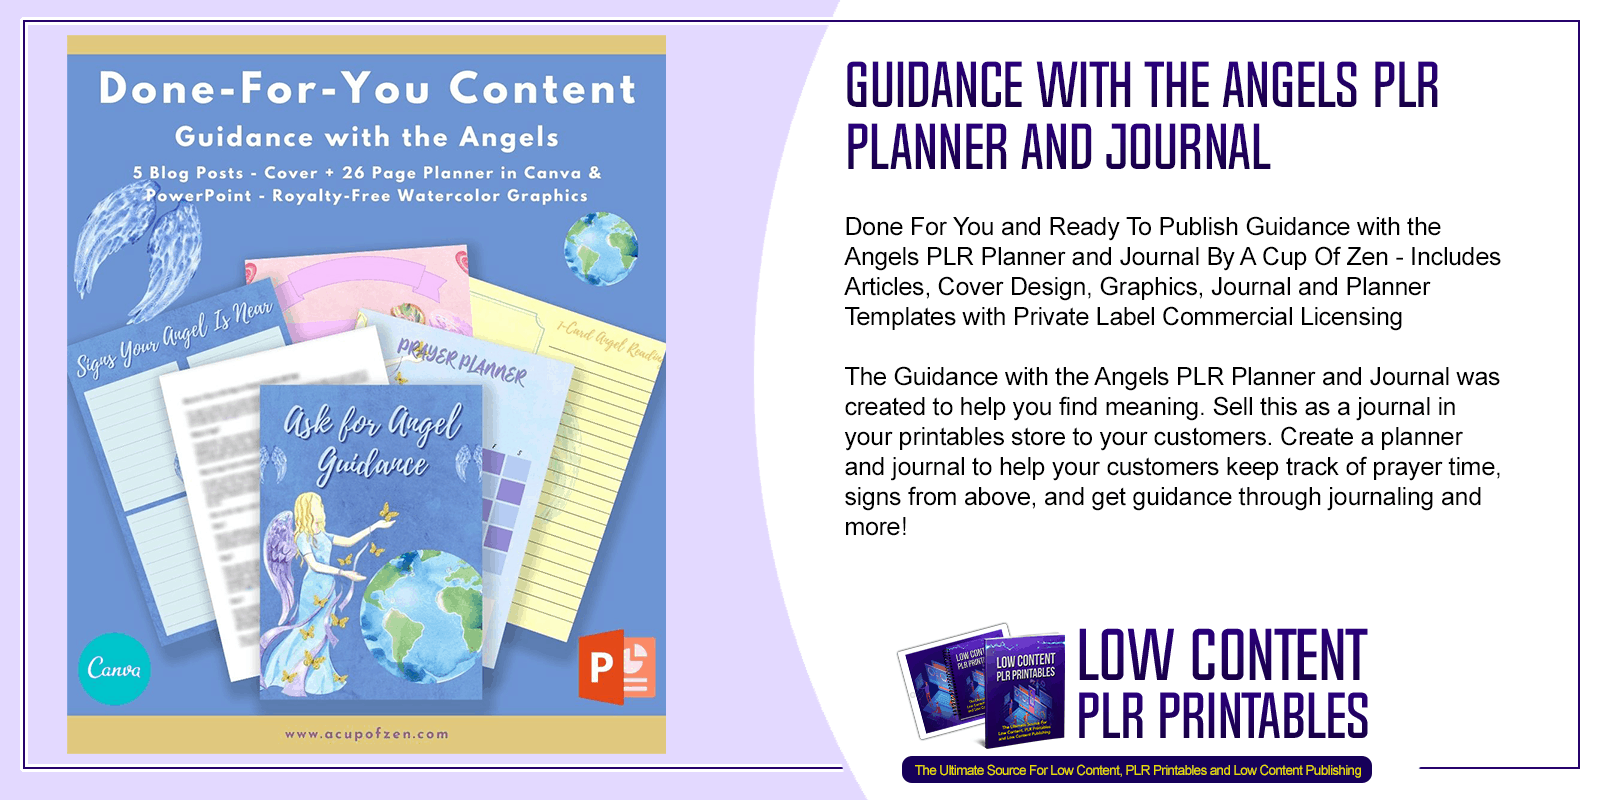 Guidance with the Angels PLR Planner and Journal